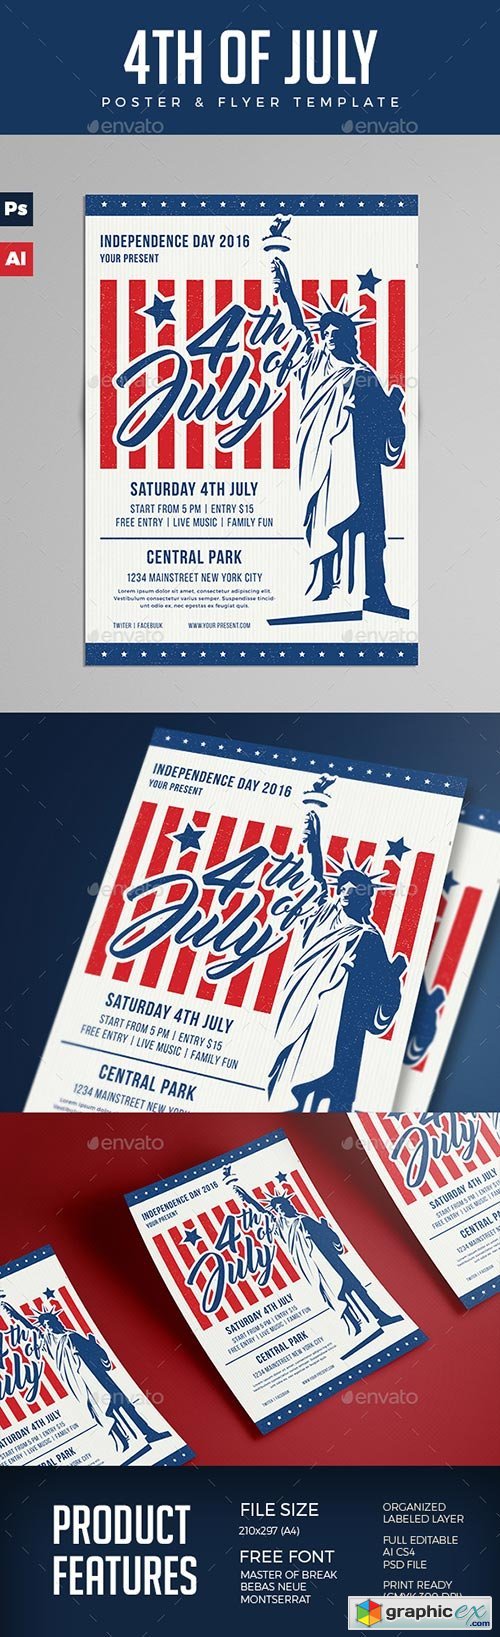 4th Of July Flyer / Poster 16687477